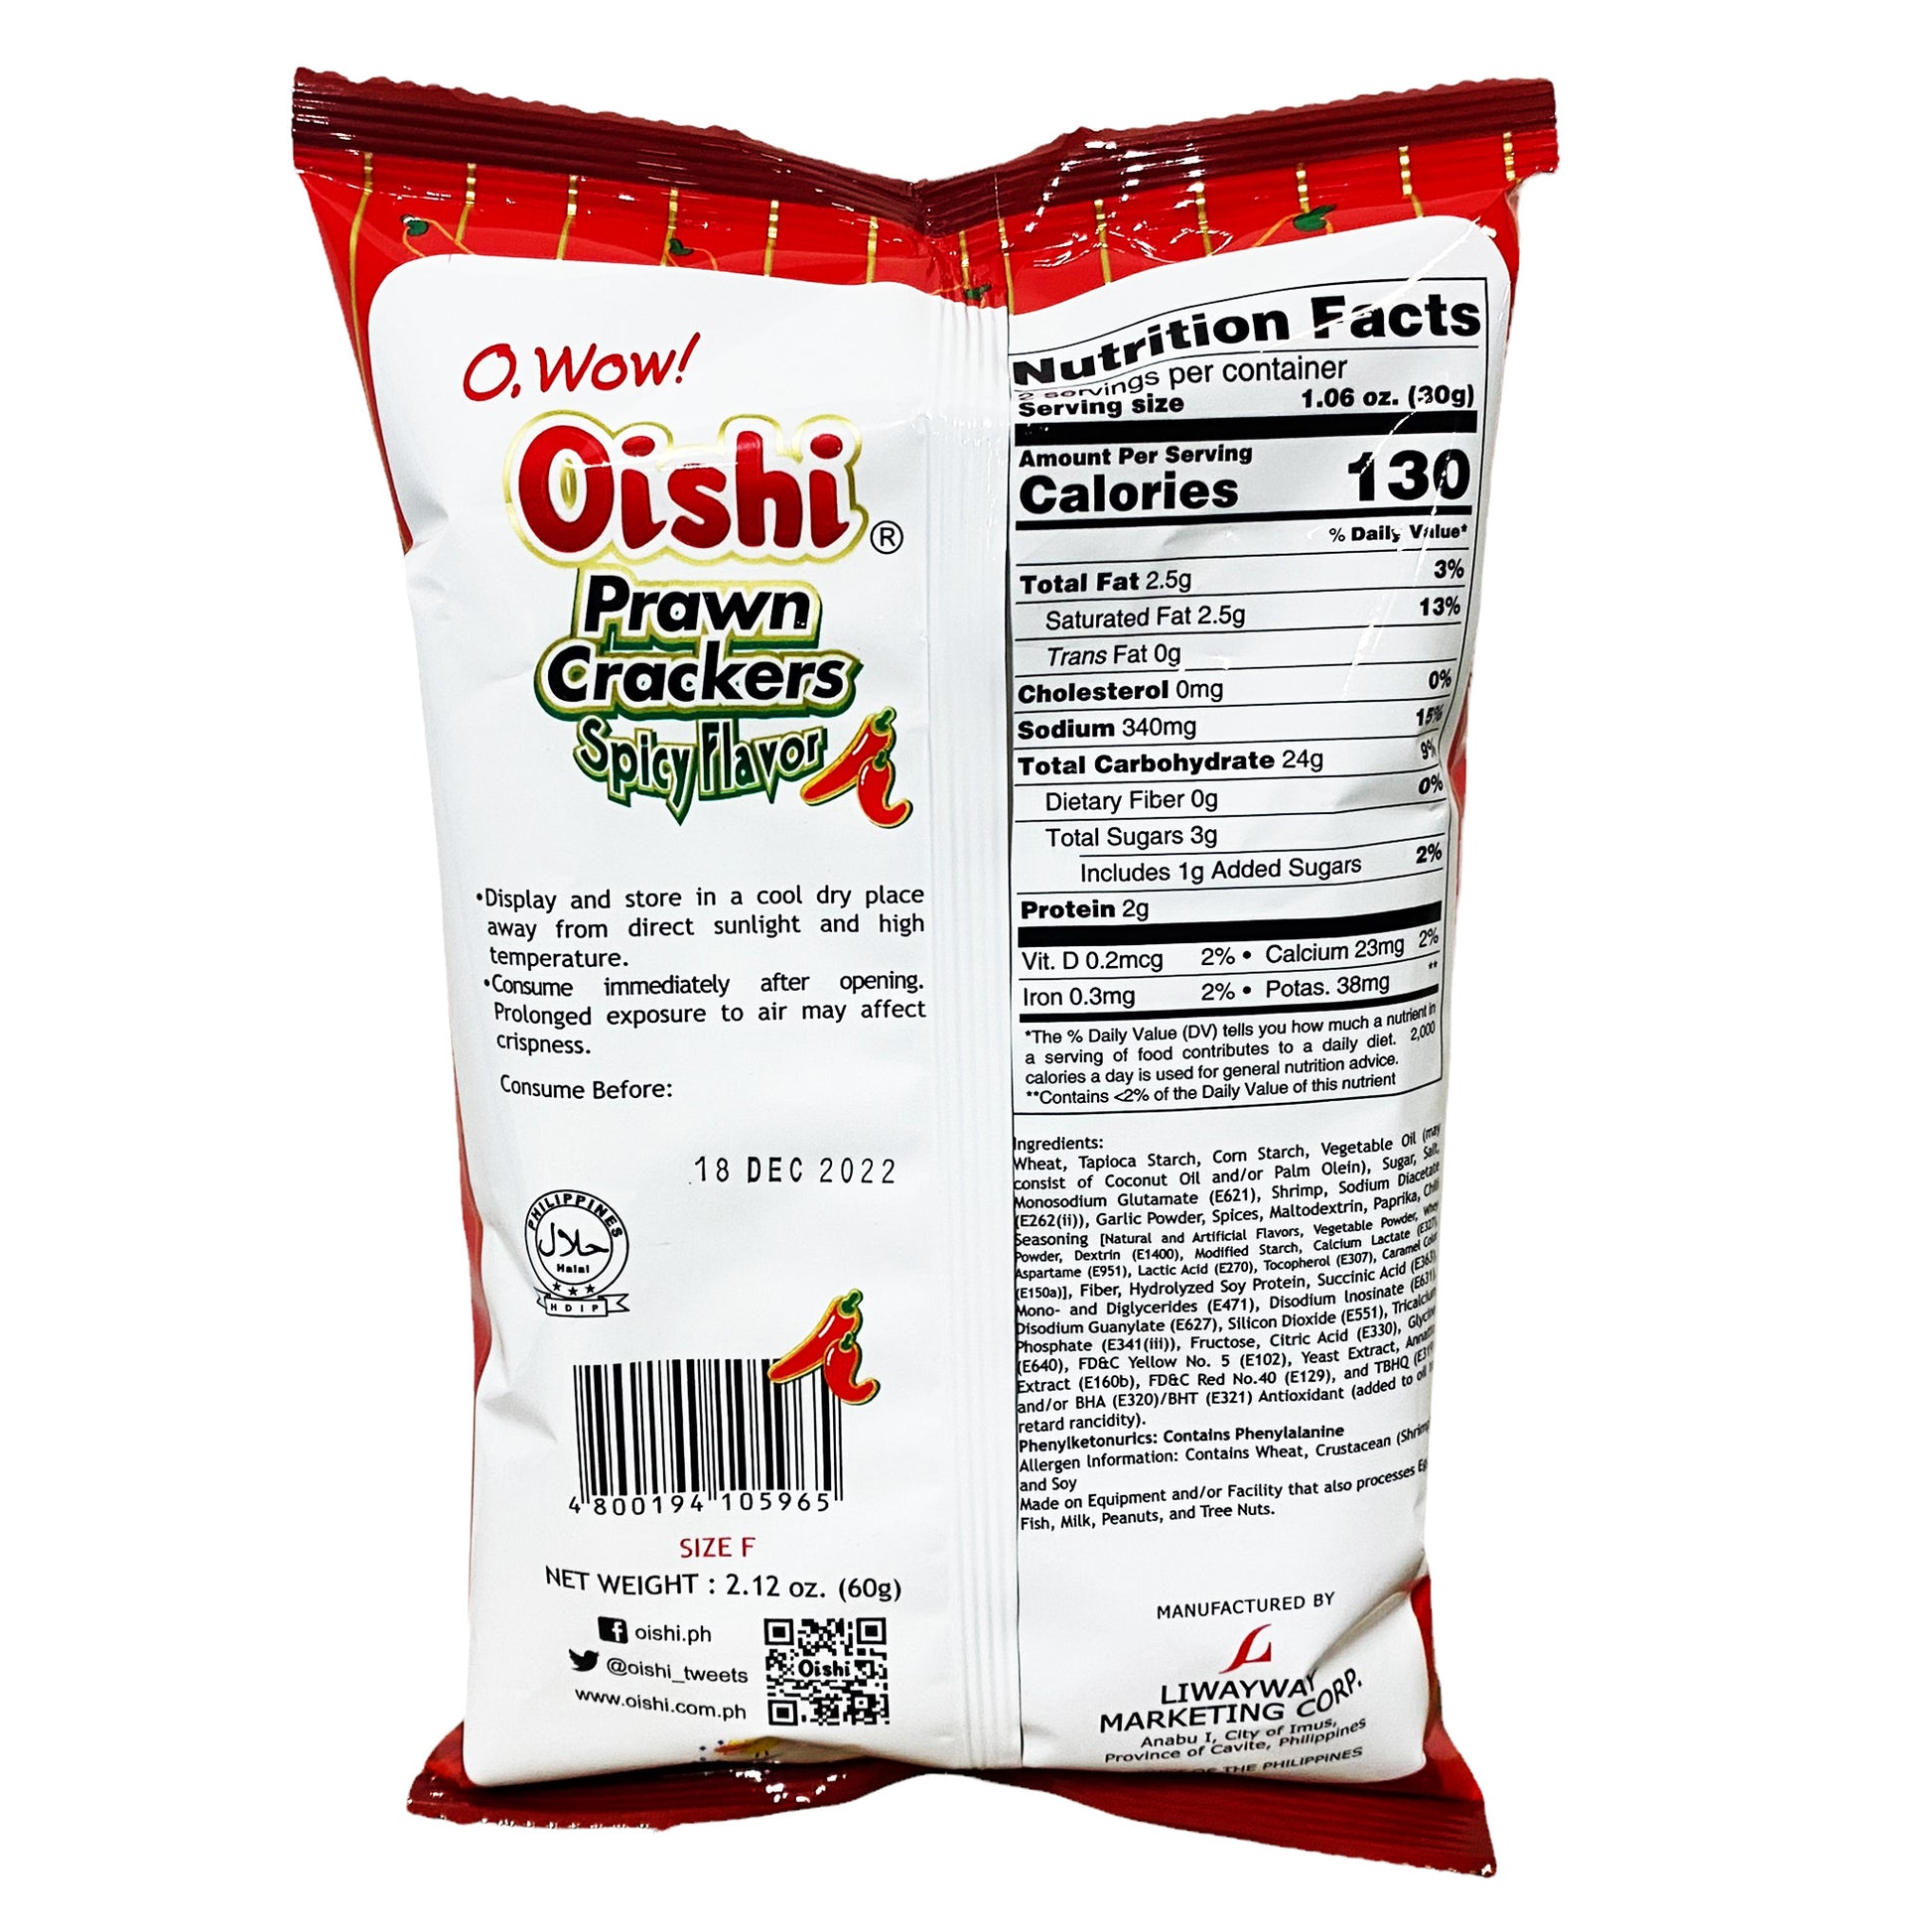 Back graphic image of Oishi Prawn Crackers Spicy Flavor 2.12oz